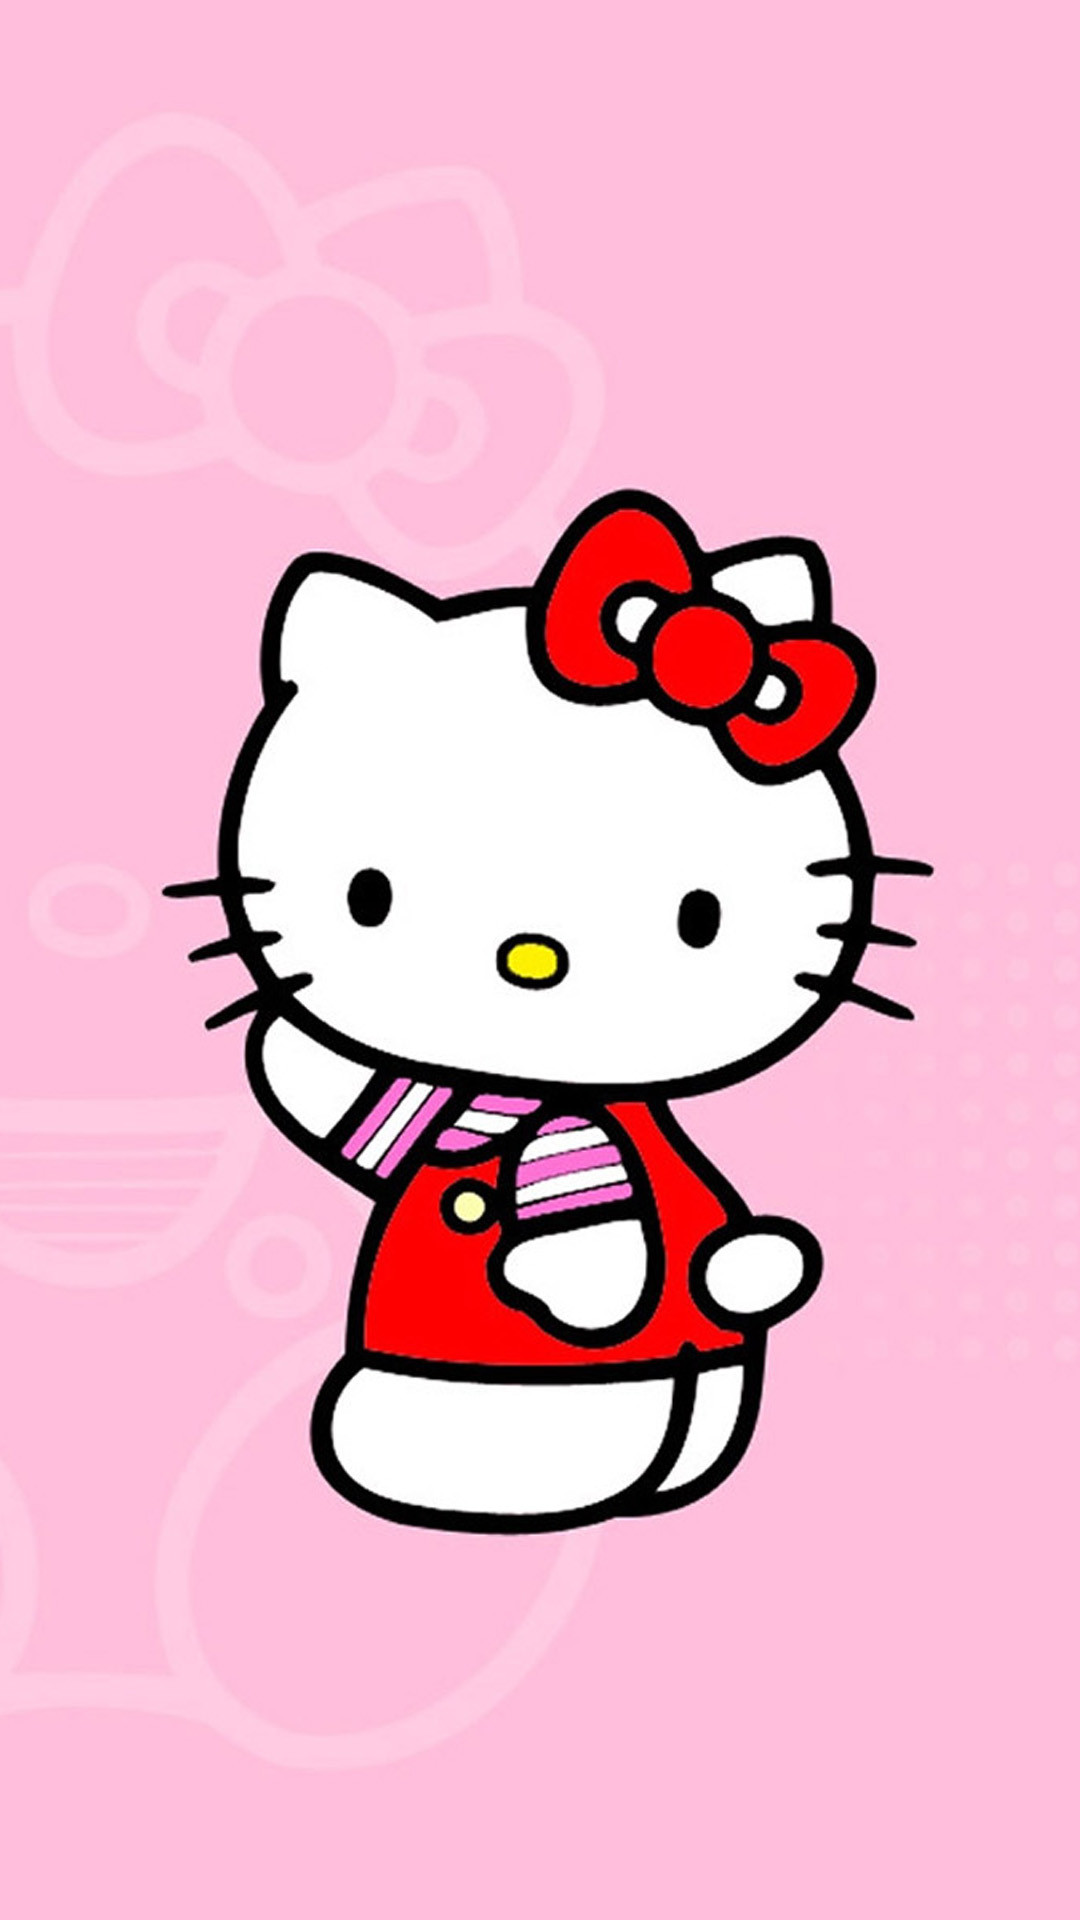 Free Download Hello Kitty Wallpaper For Iphone 72 Images 1080x19 For Your Desktop Mobile Tablet Explore 53 Pictures Of Hello Kitty Wallpaper Hello Kitty Desktop Wallpaper Cute Hello Kitty Pictures Wallpaper